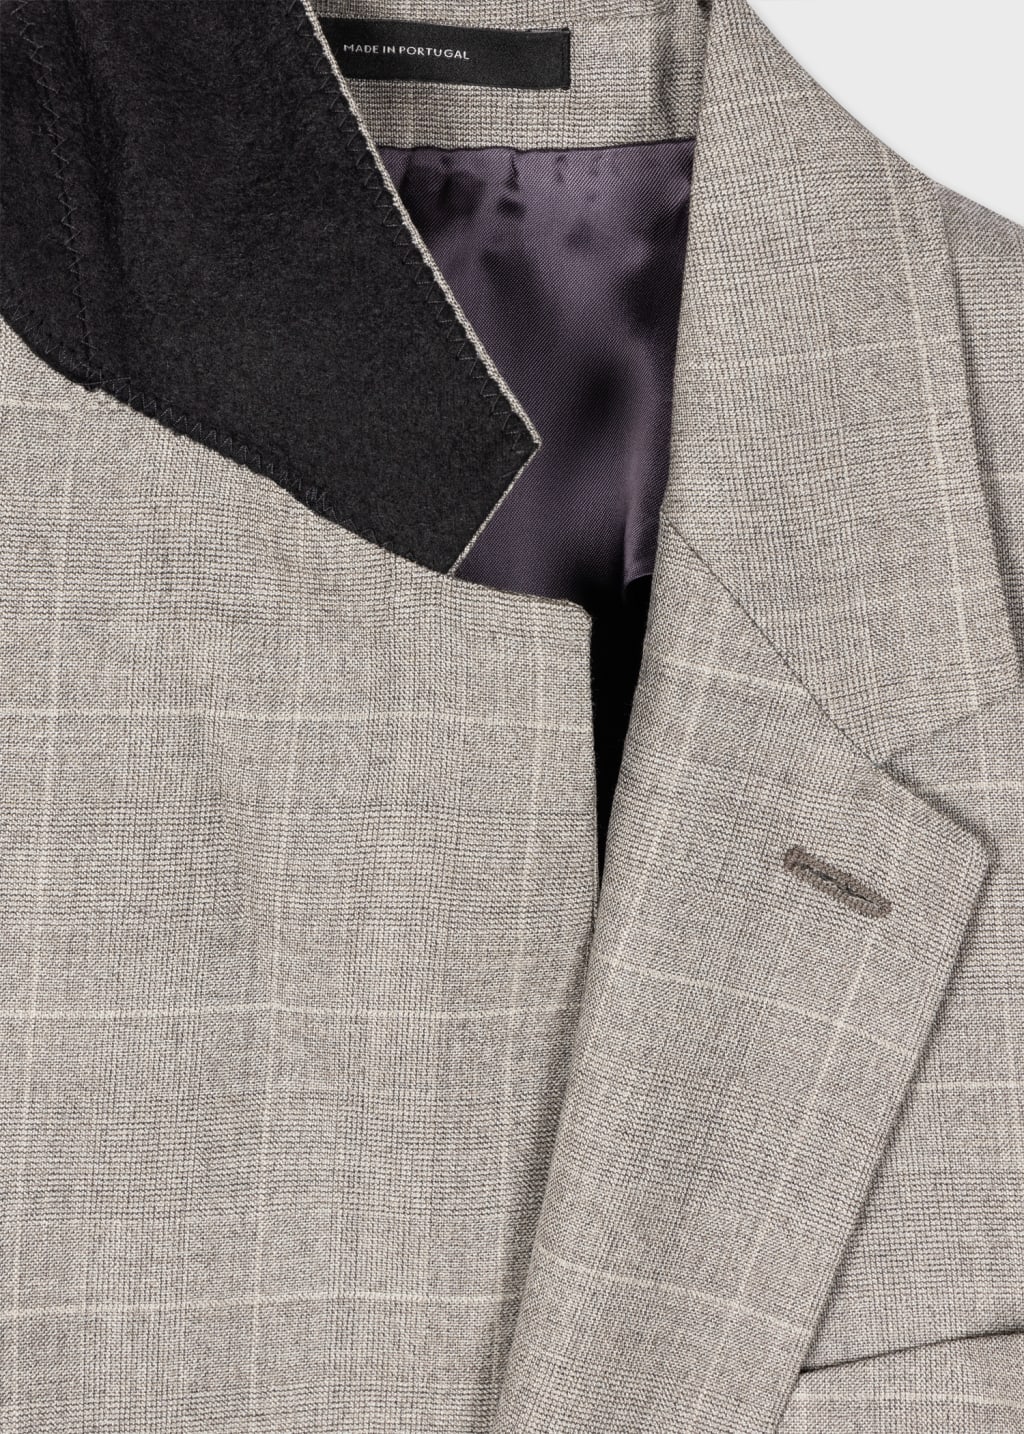 Product View - Tailored-Fit Grey Multi-Check Wool Buggy-Lined Suit by Paul Smith